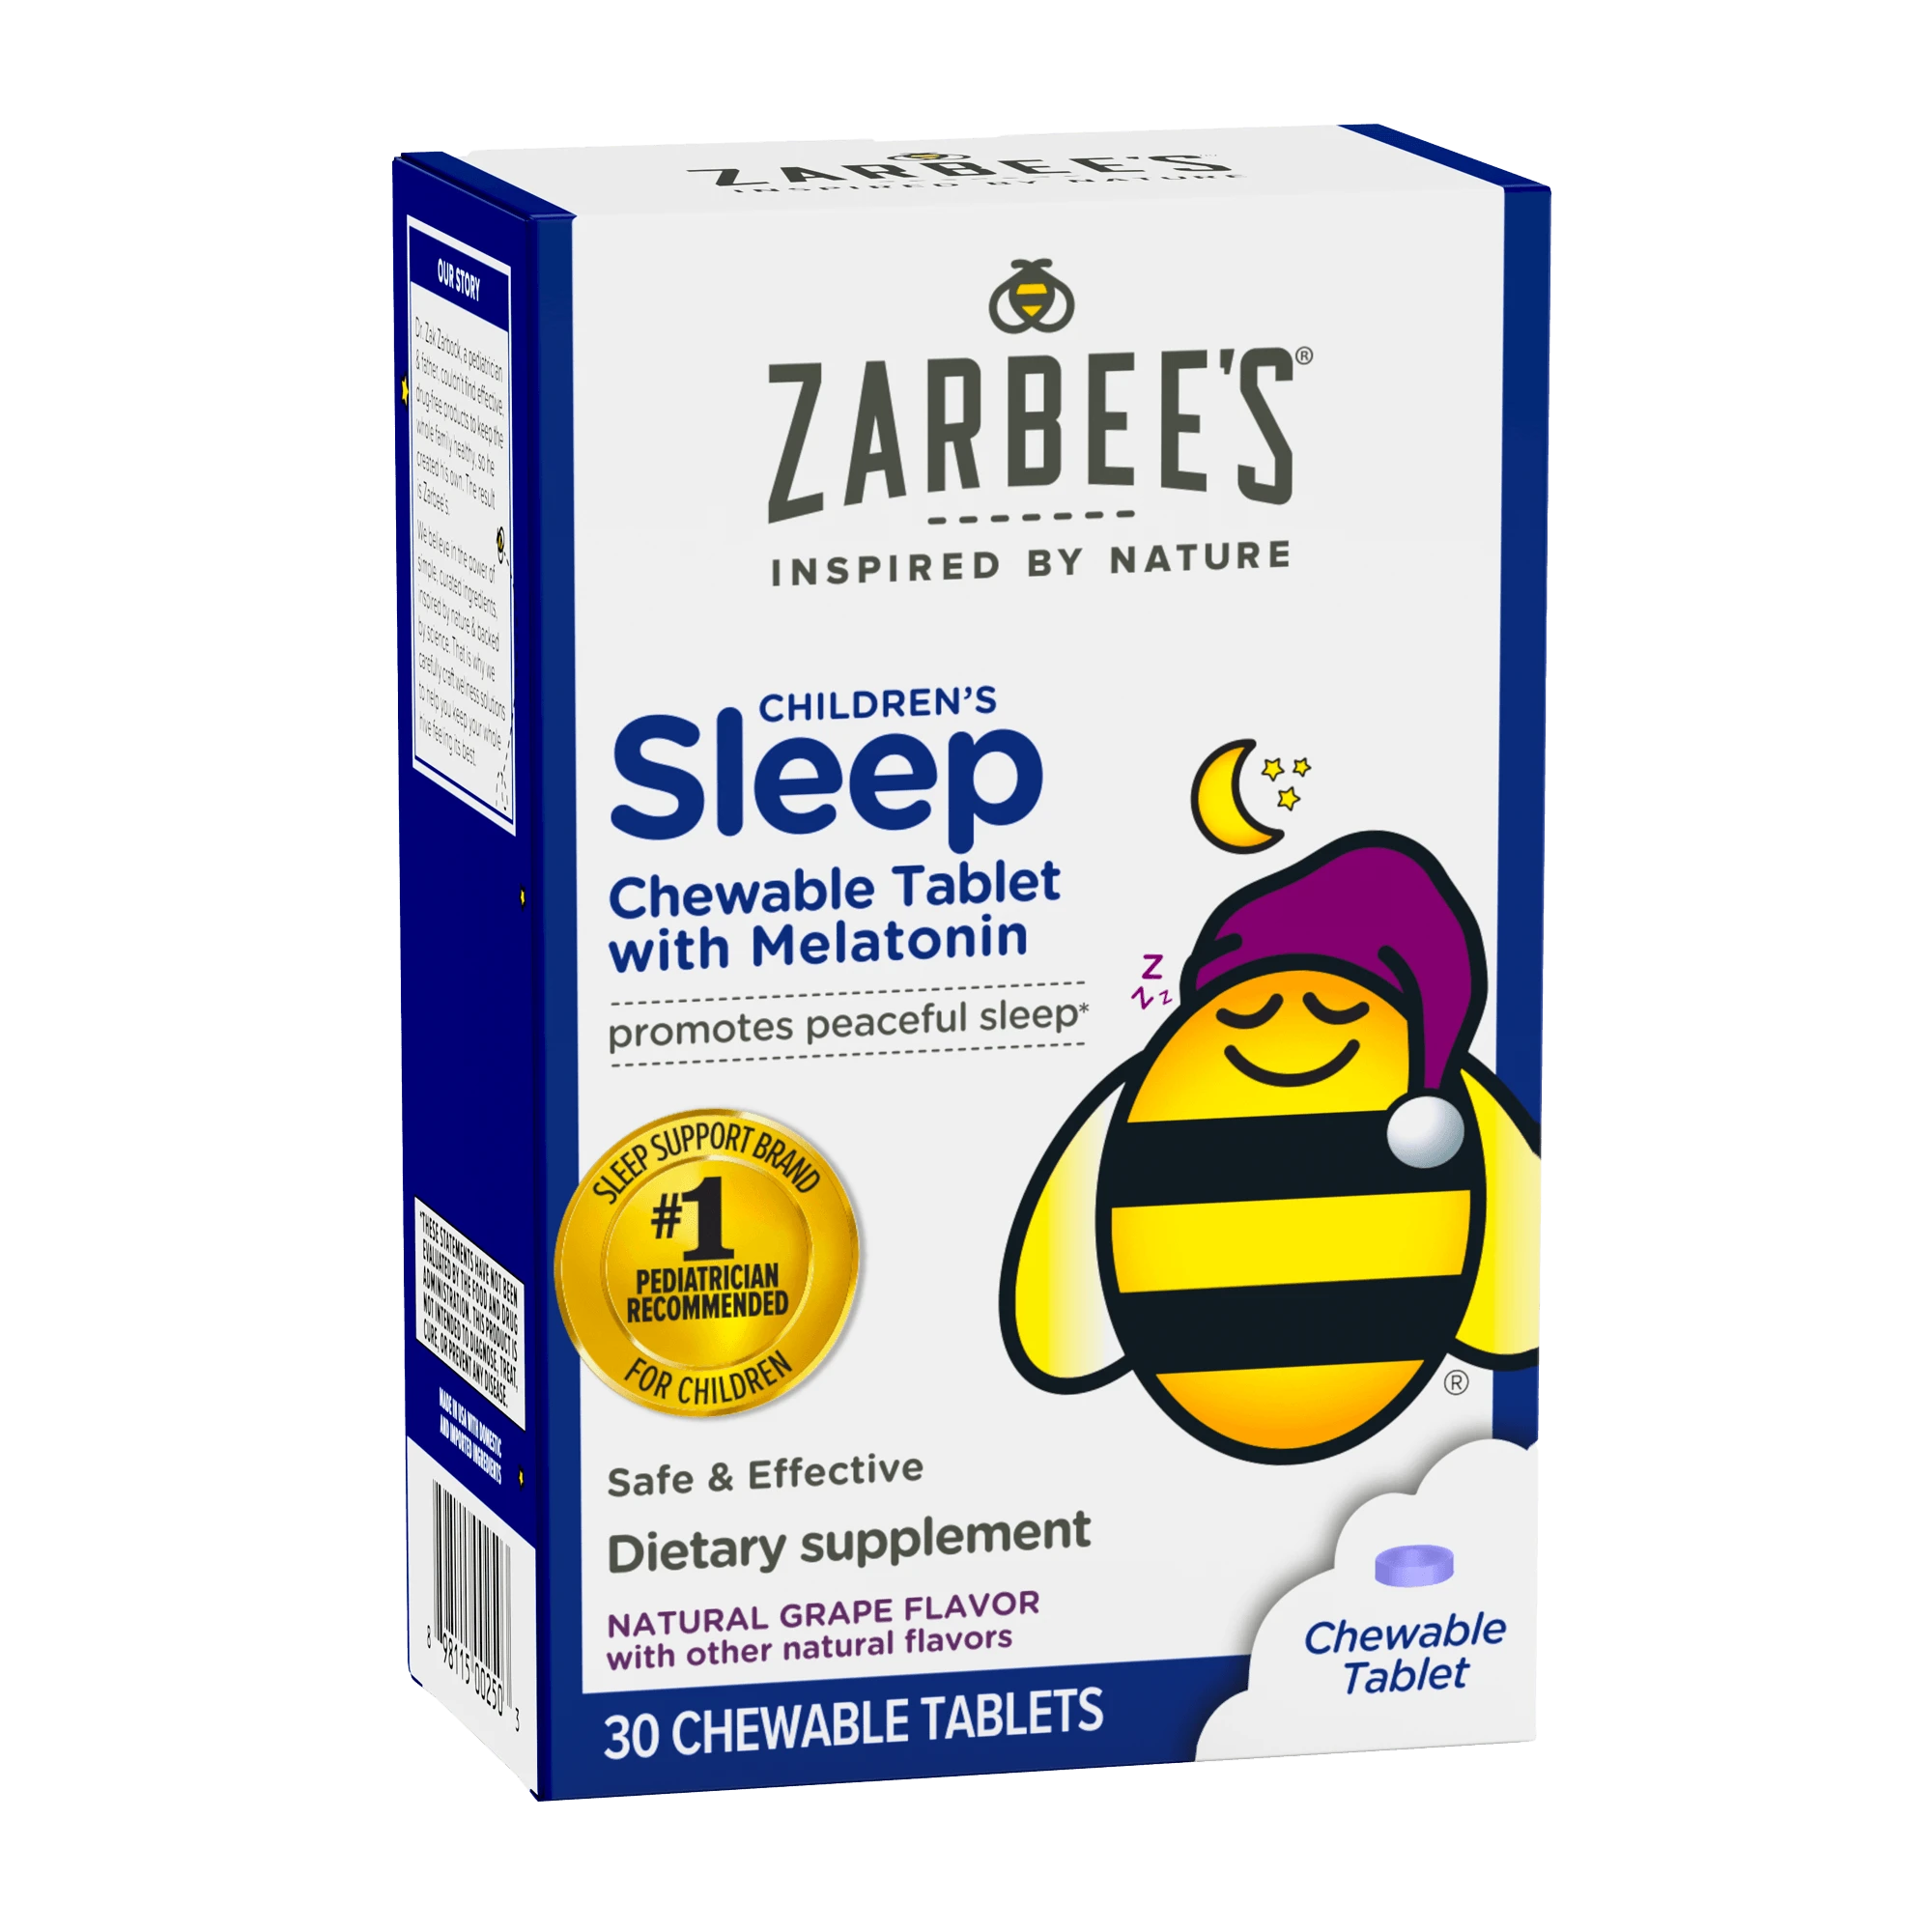 A rendering of the packaging for Zarbee’s® Children's Sleep Chewable Tablet with Melatonin in natural grape flavor